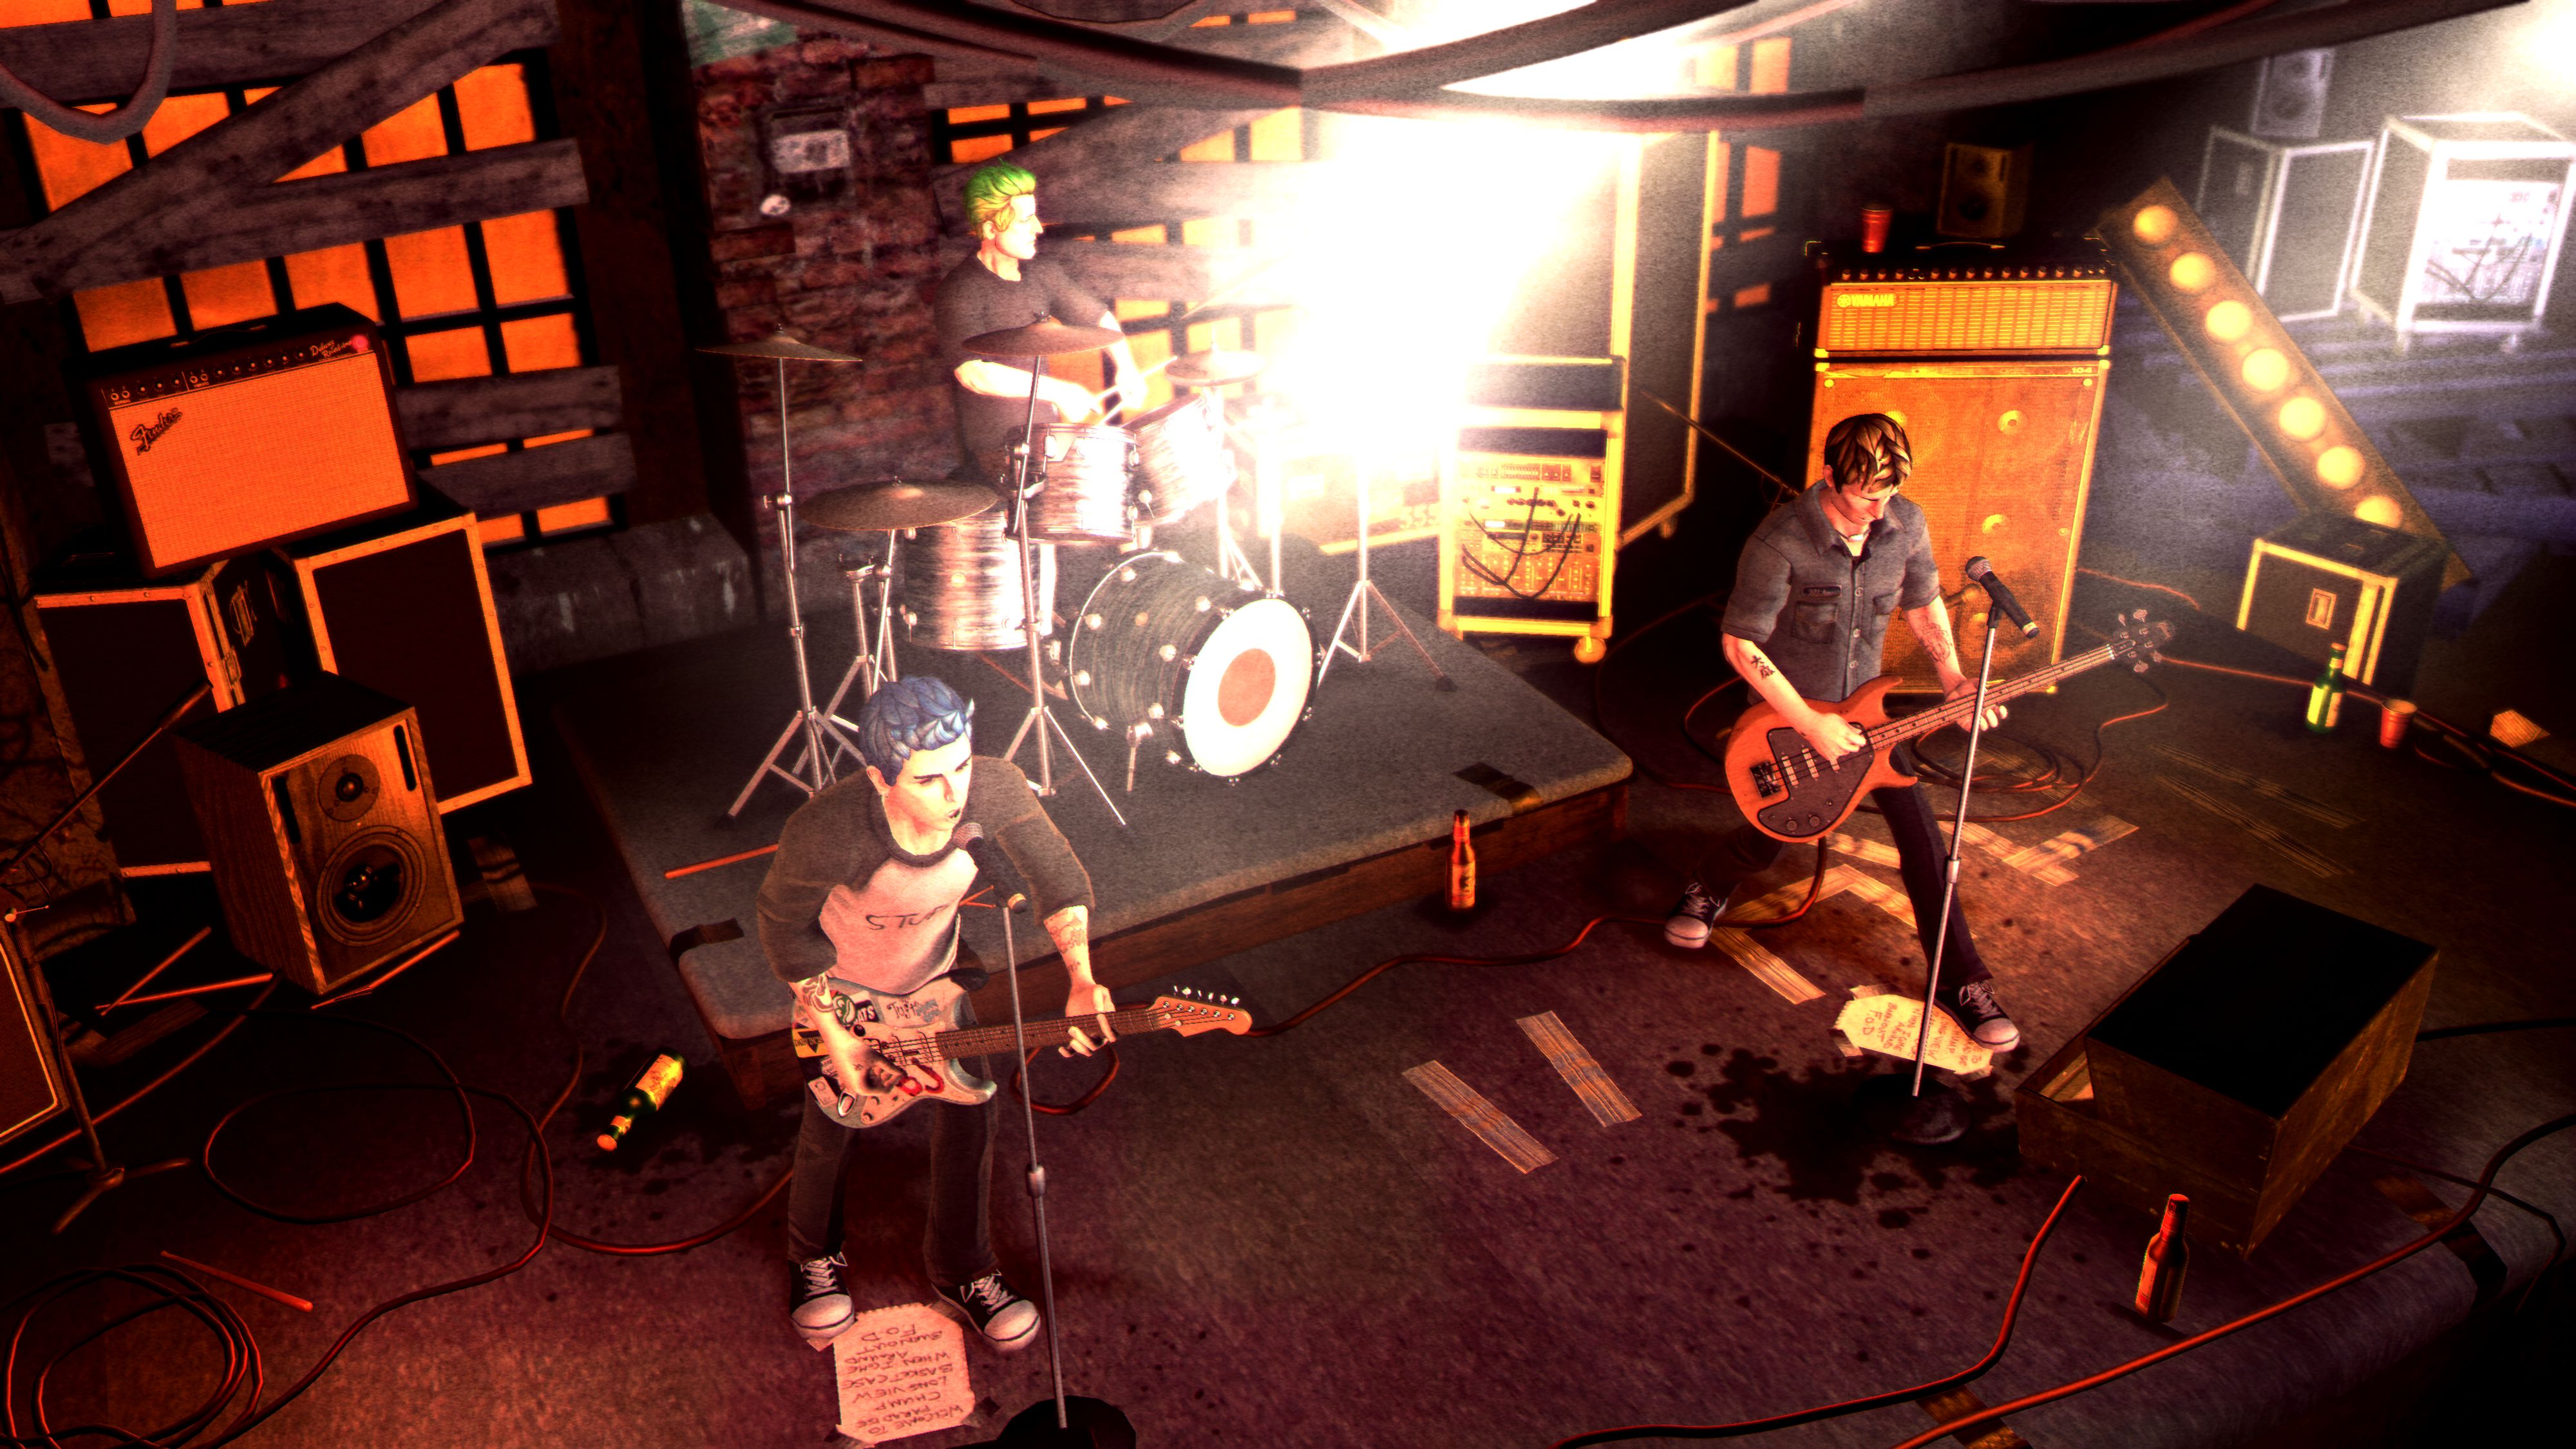 Greenday Rockband Backgrounds, Compatible - PC, Mobile, Gadgets| 4000x2250 px